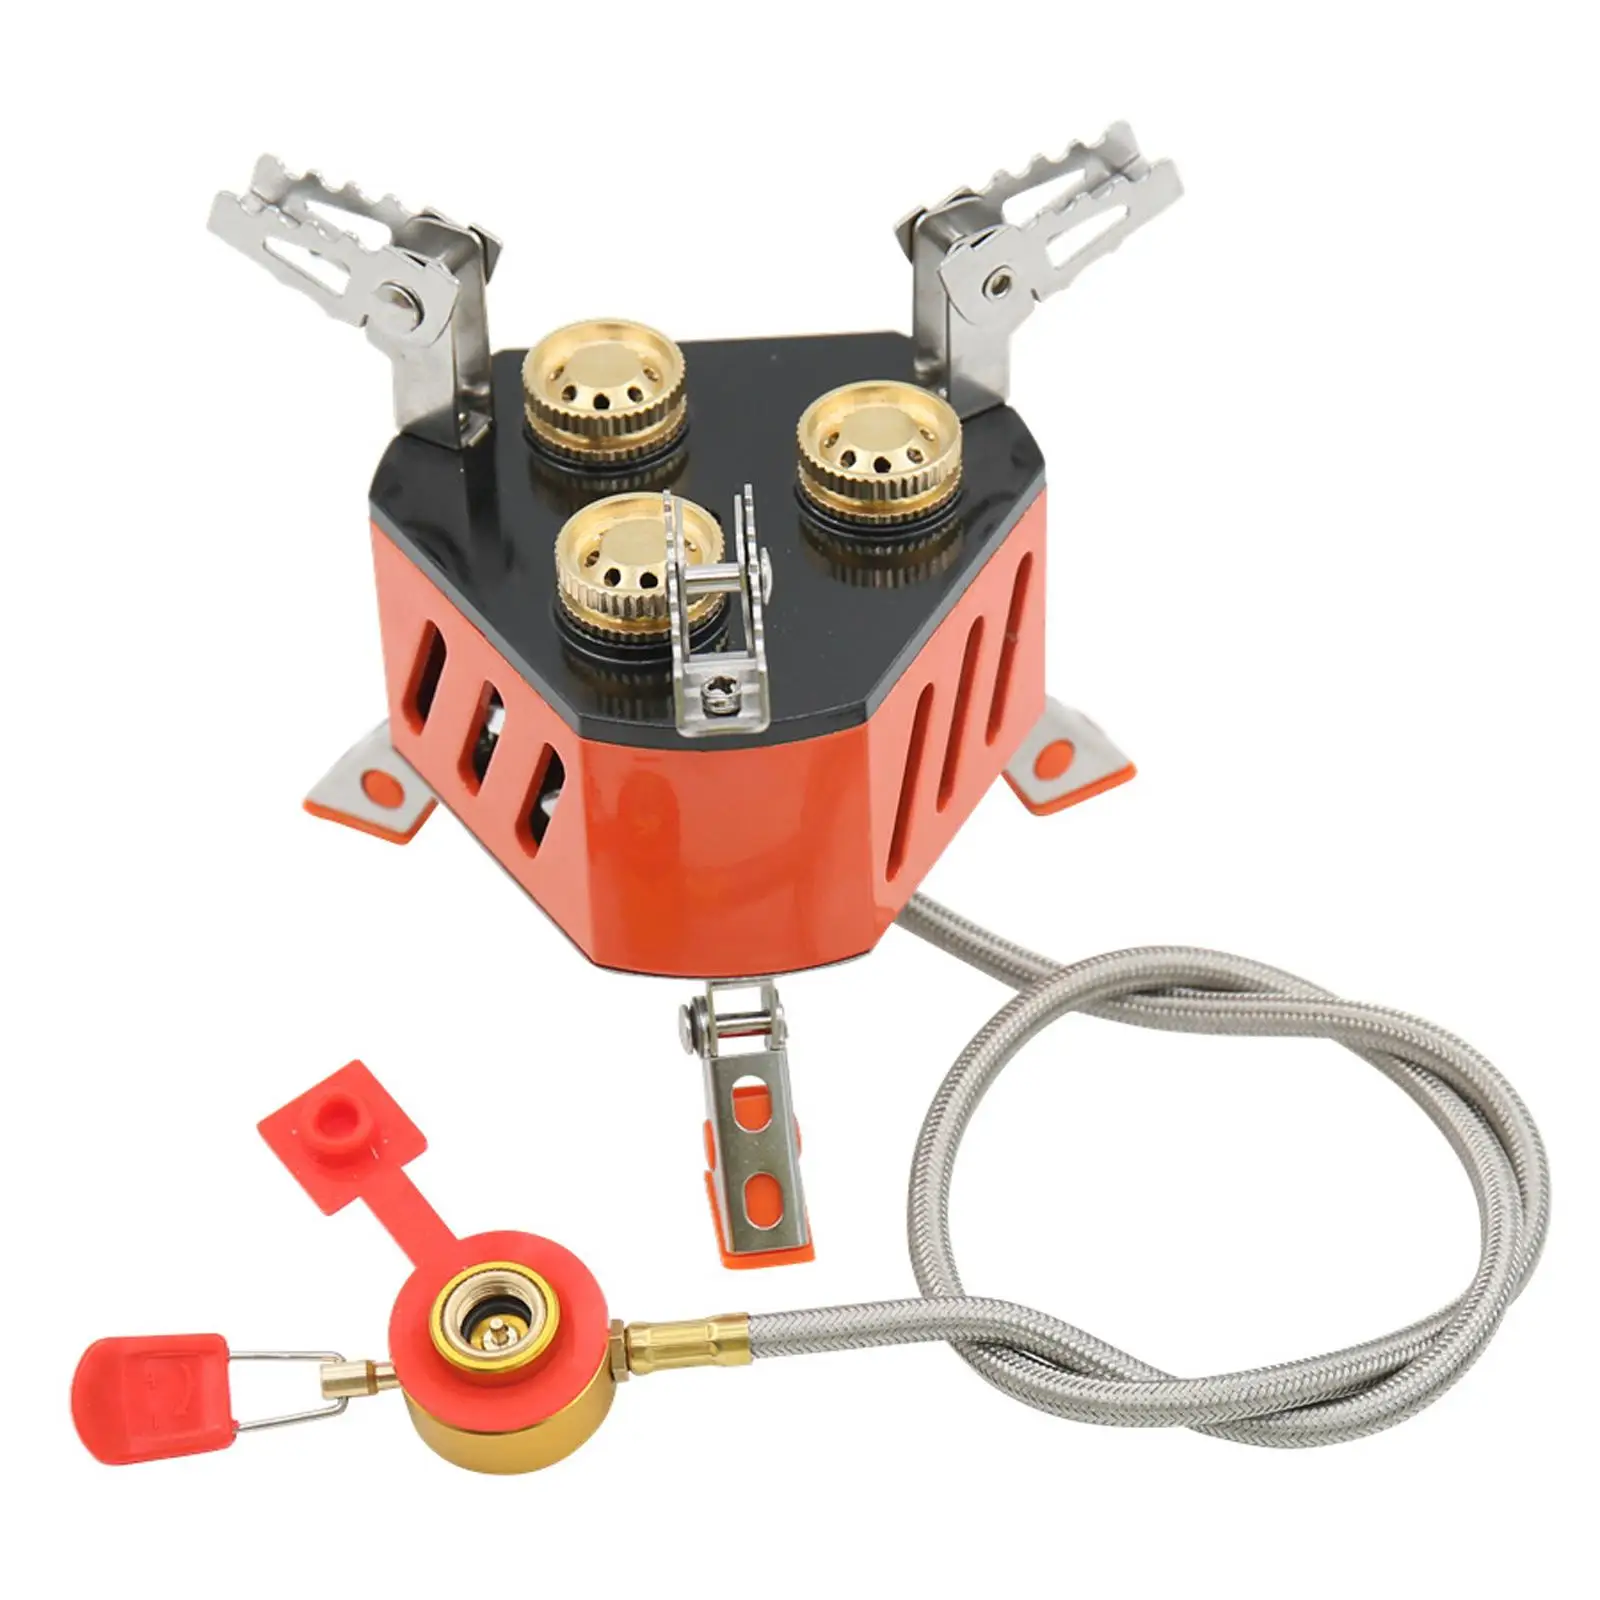 11800W Portable Camping Stove Outdoor Gas Burner Butane Propane Burner Mini Stove Cooker for Hiking Cooking Cookware